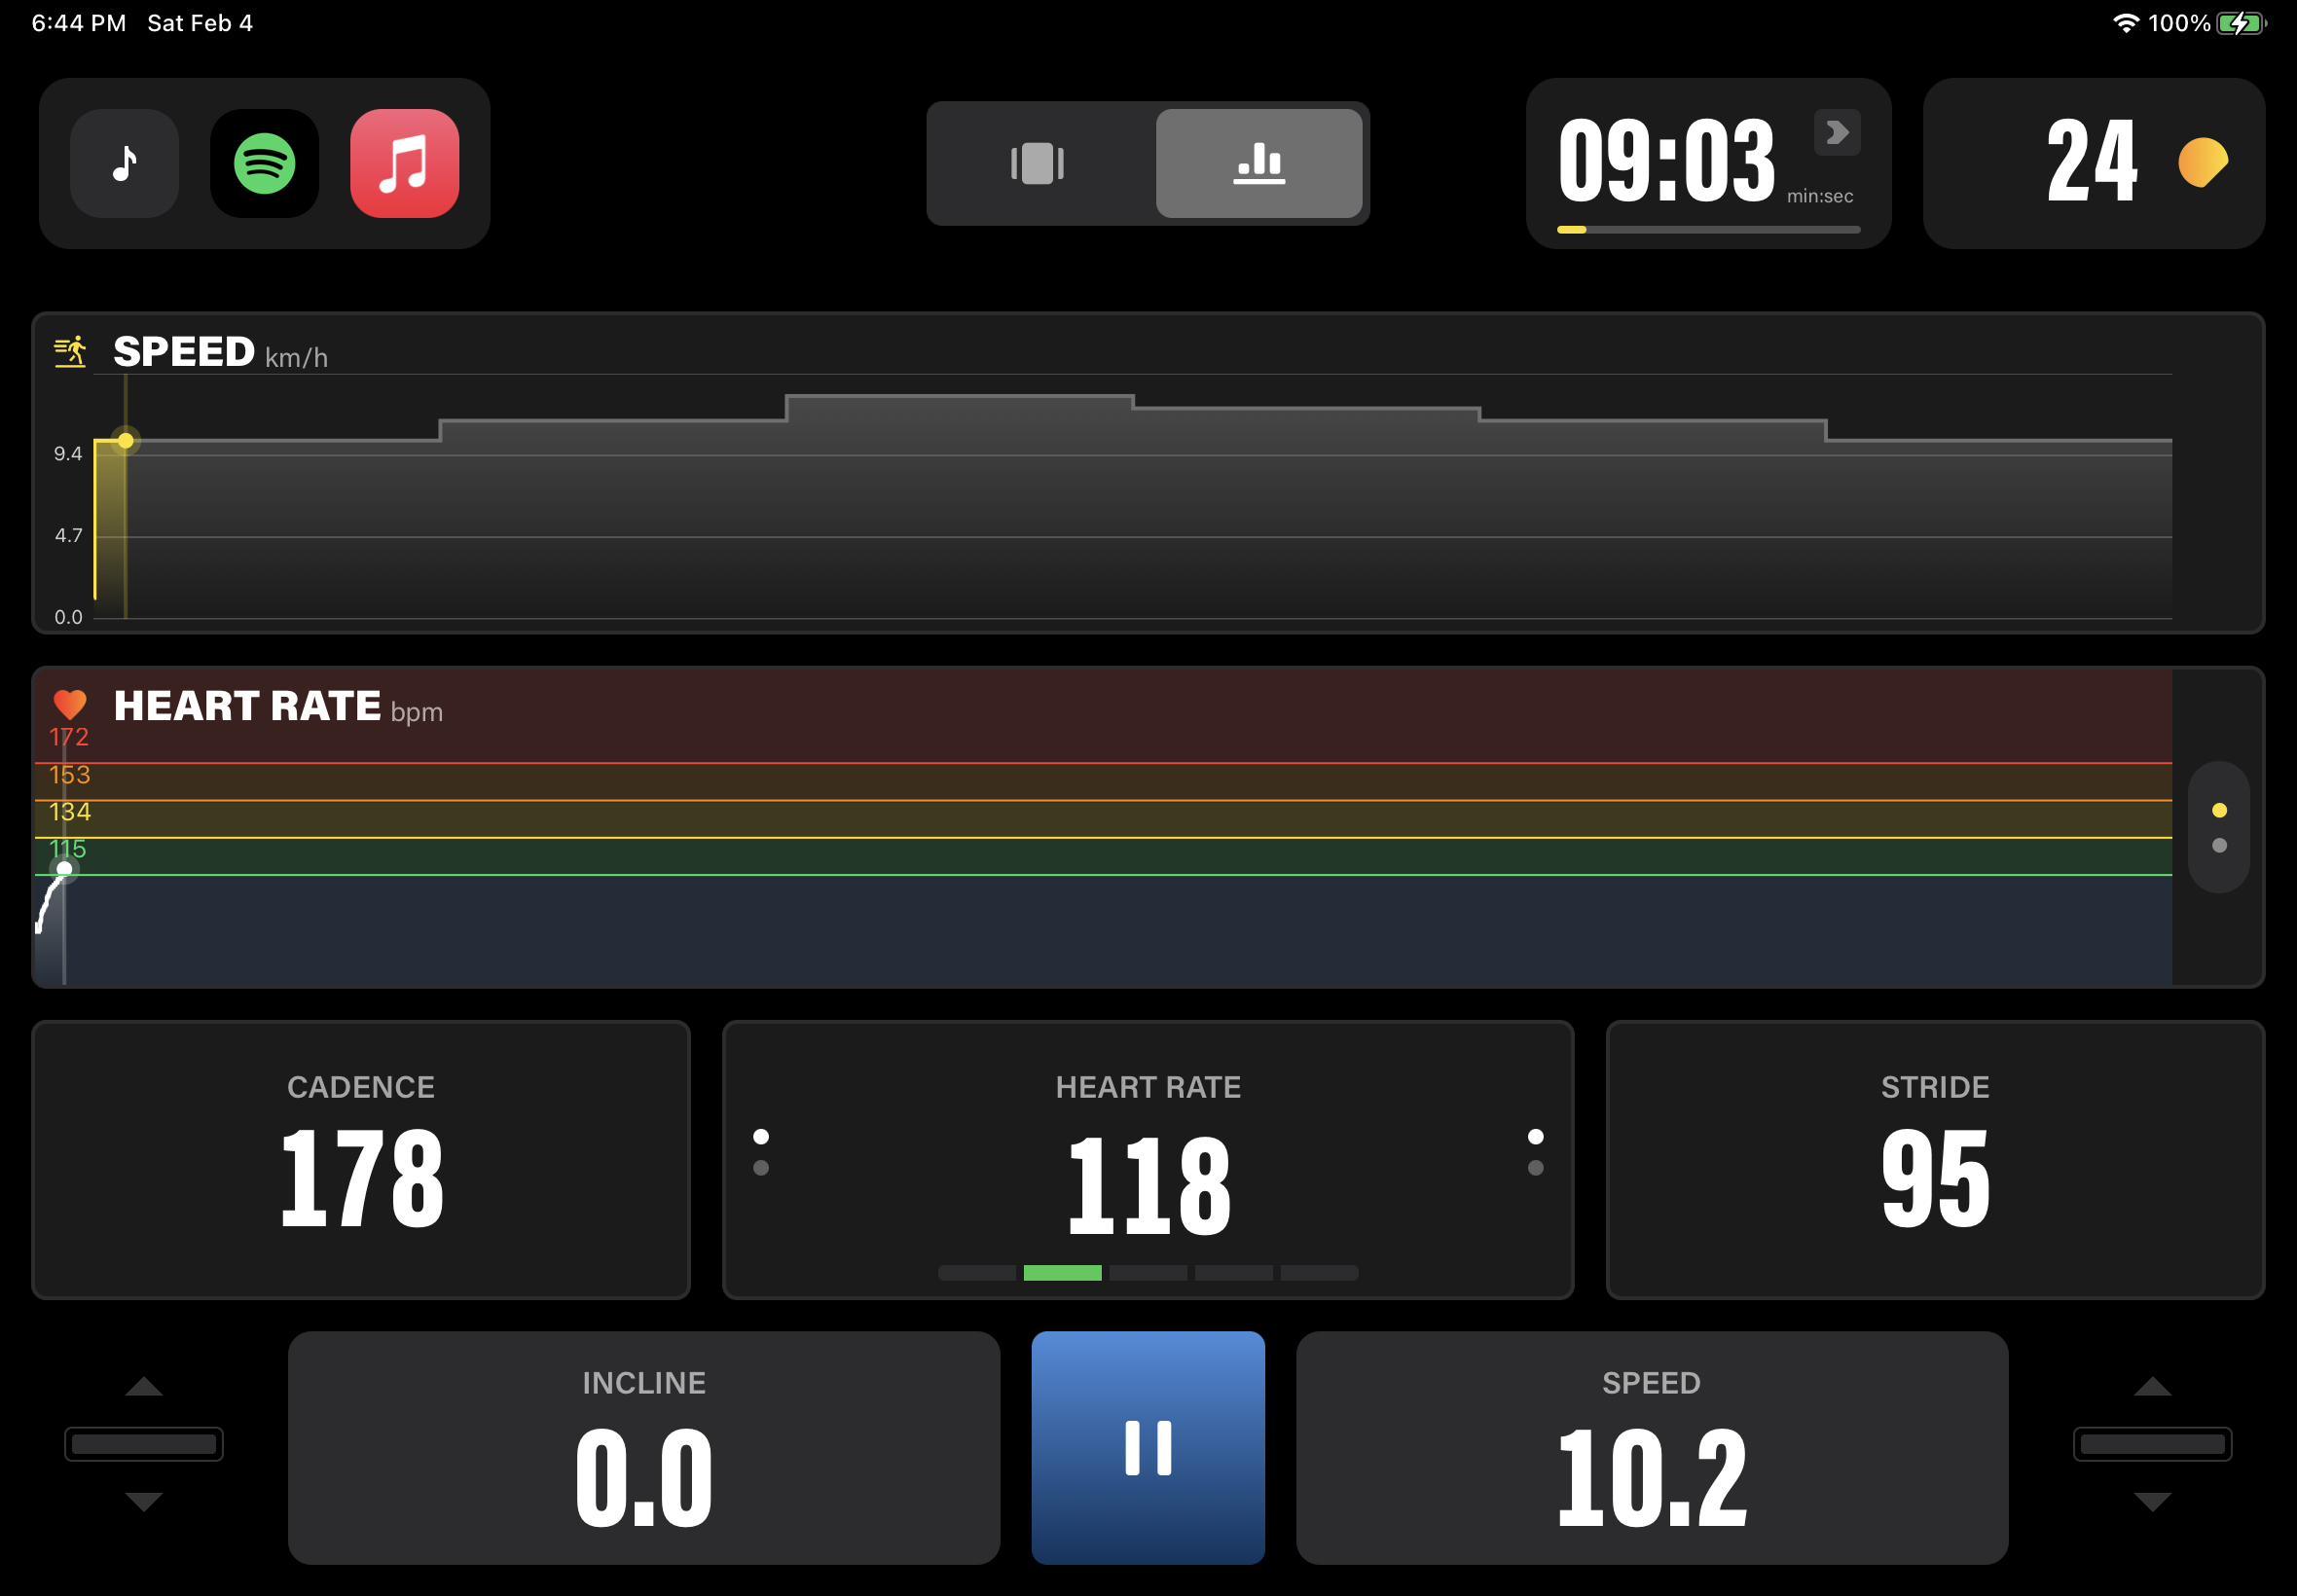 A screenshot of the Technogym Live app when a run is in progress, showing a line graph for speed, a line graph for heart rate, and meters for cadence, heart rate, stride, speed, and incline.